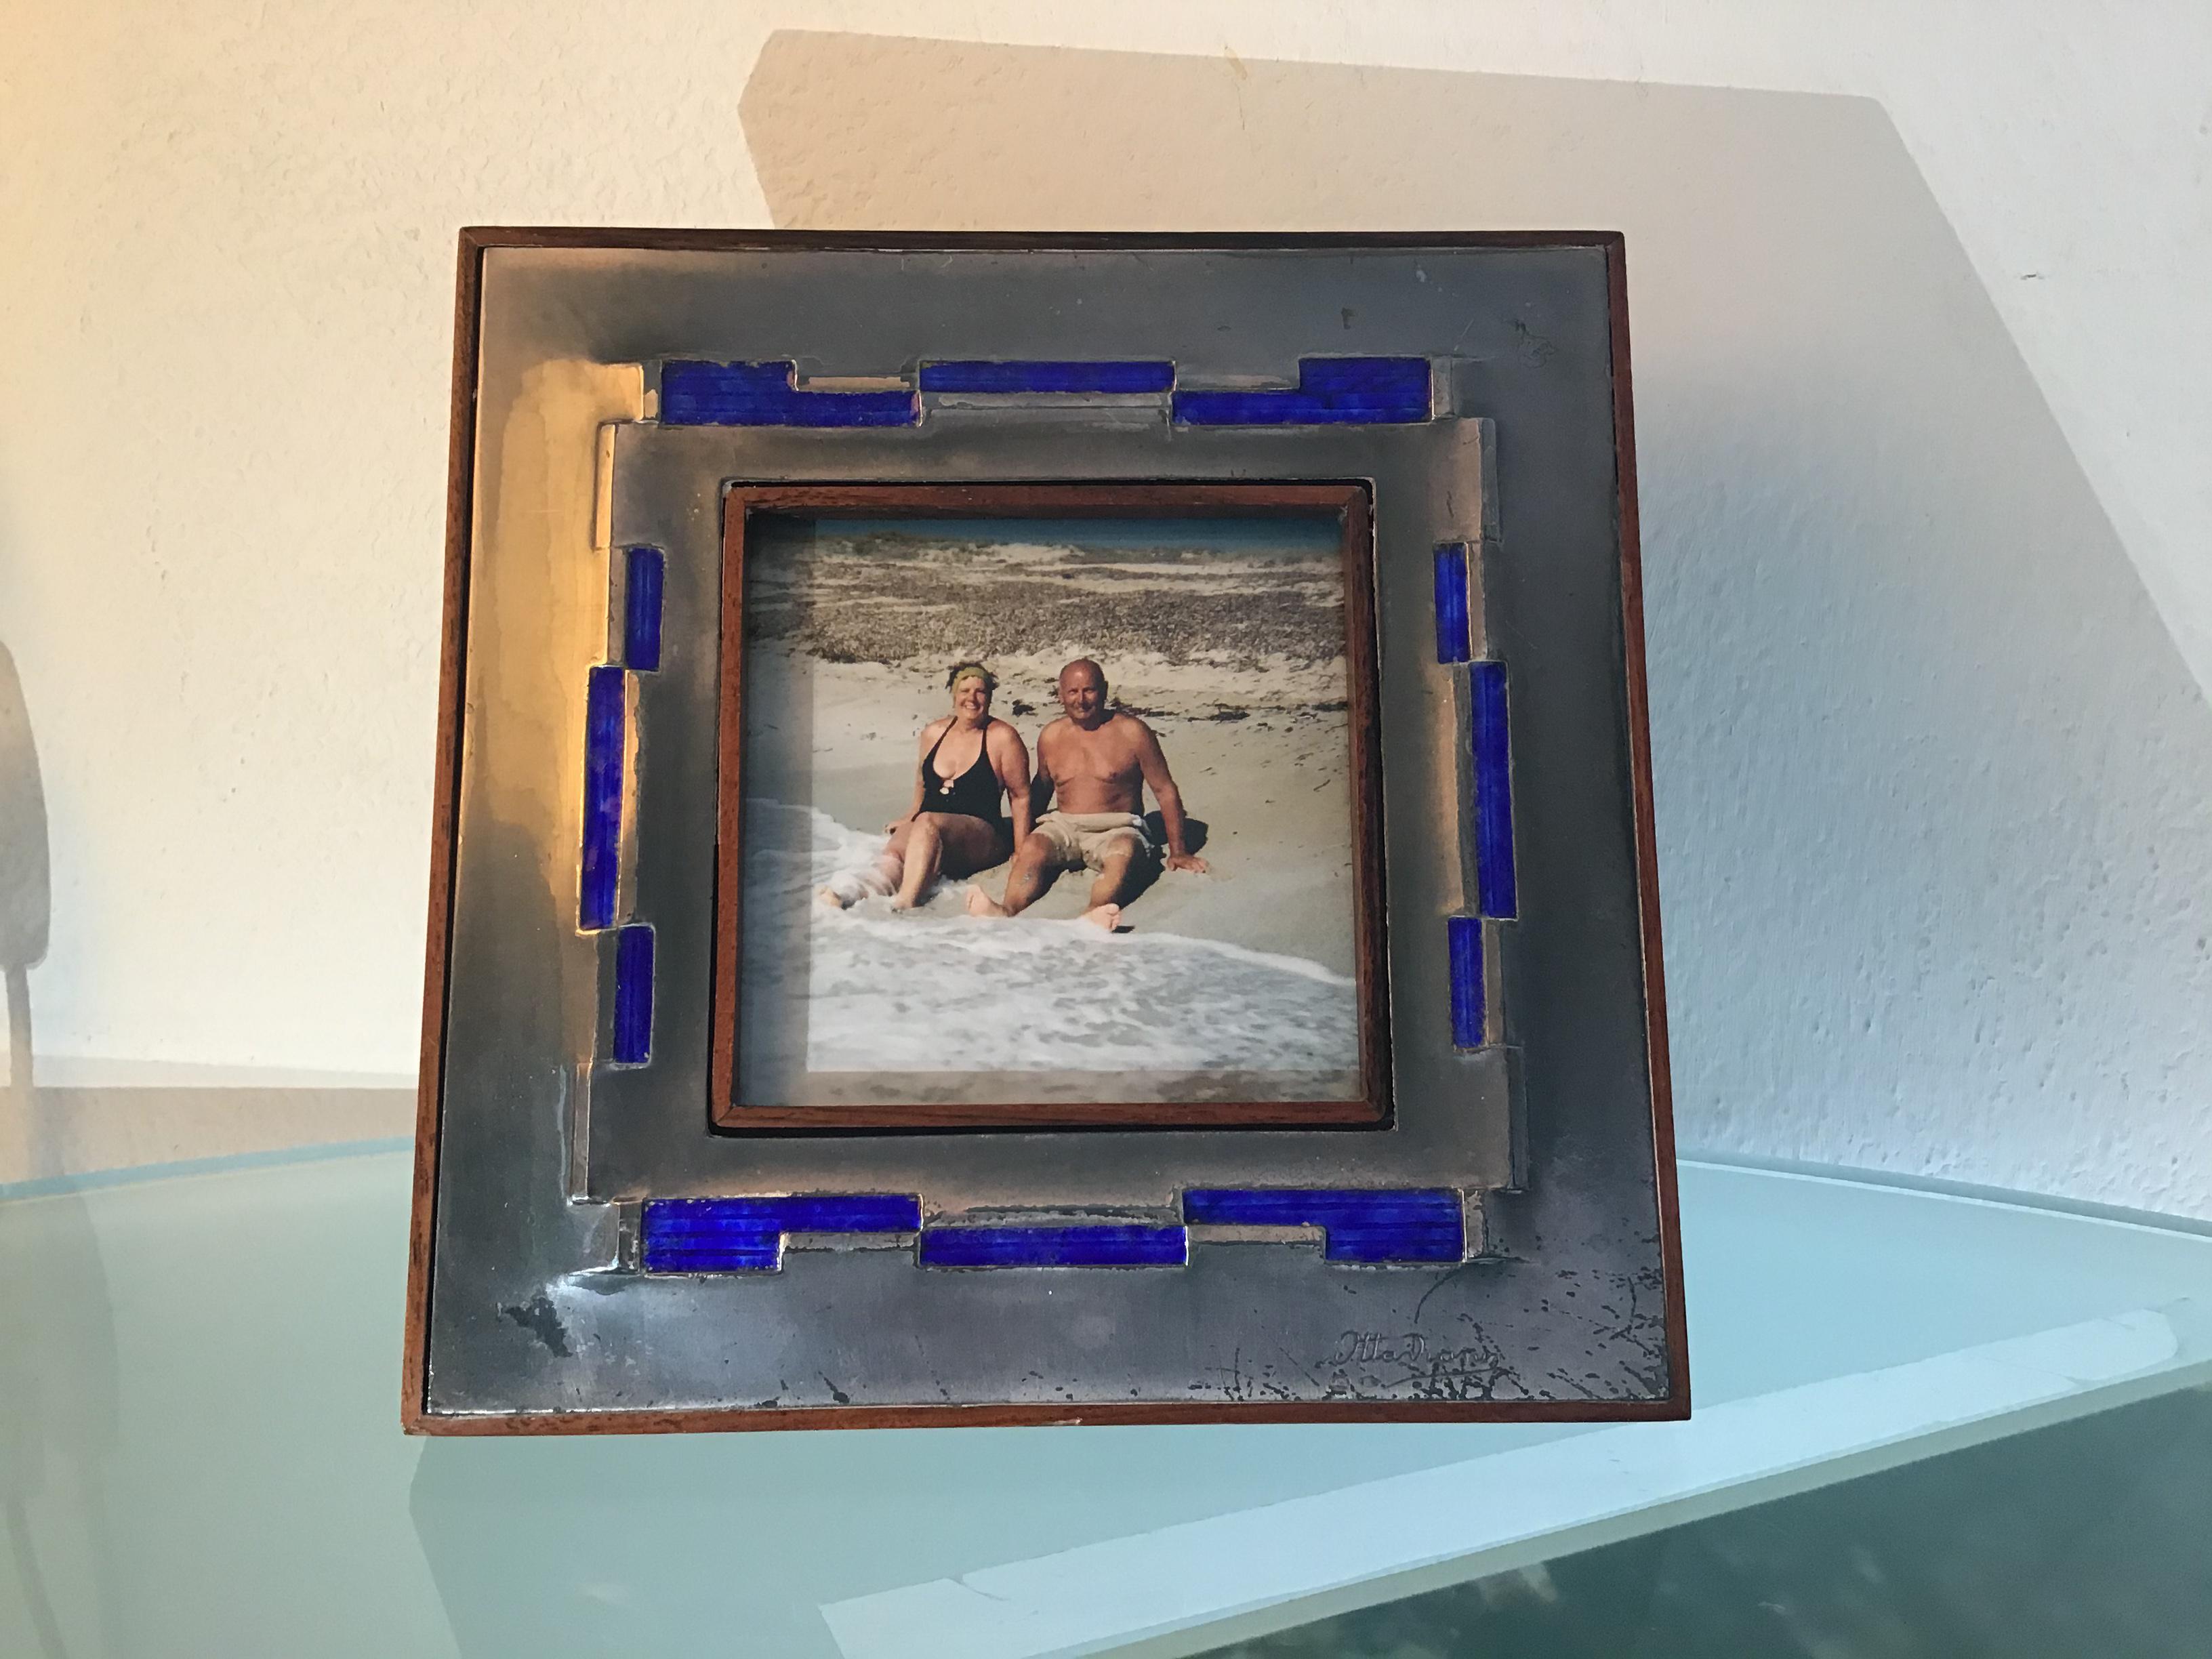 Ottaviani Pucture Frame 925 Silver Enamelled Copper Wood 1960 Italy For Sale 1